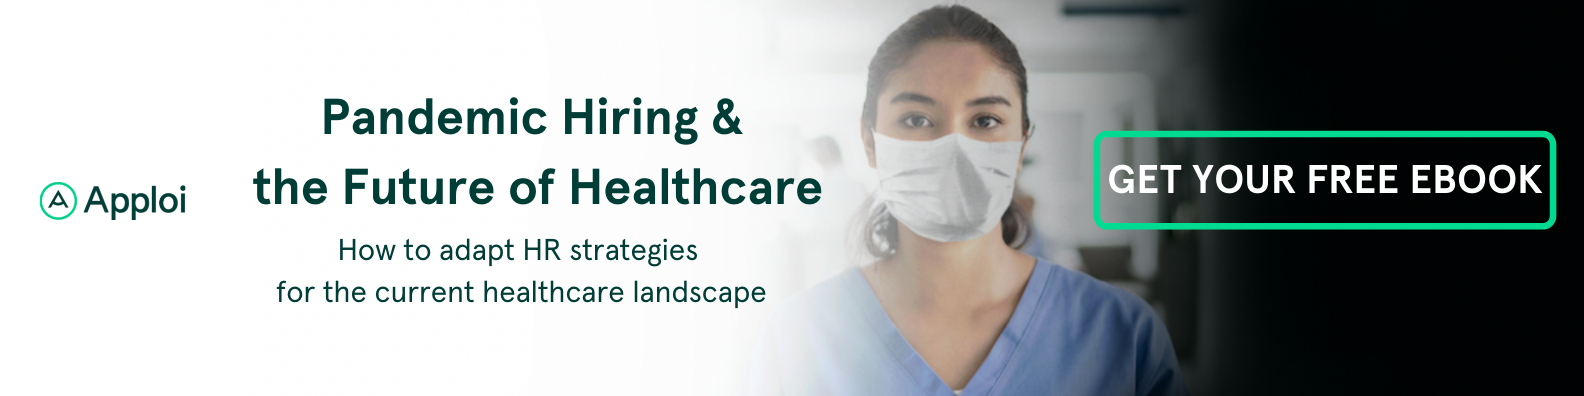 A banner advertising a free ebook, titled Pandemic Hiring and the Future of Healthcare